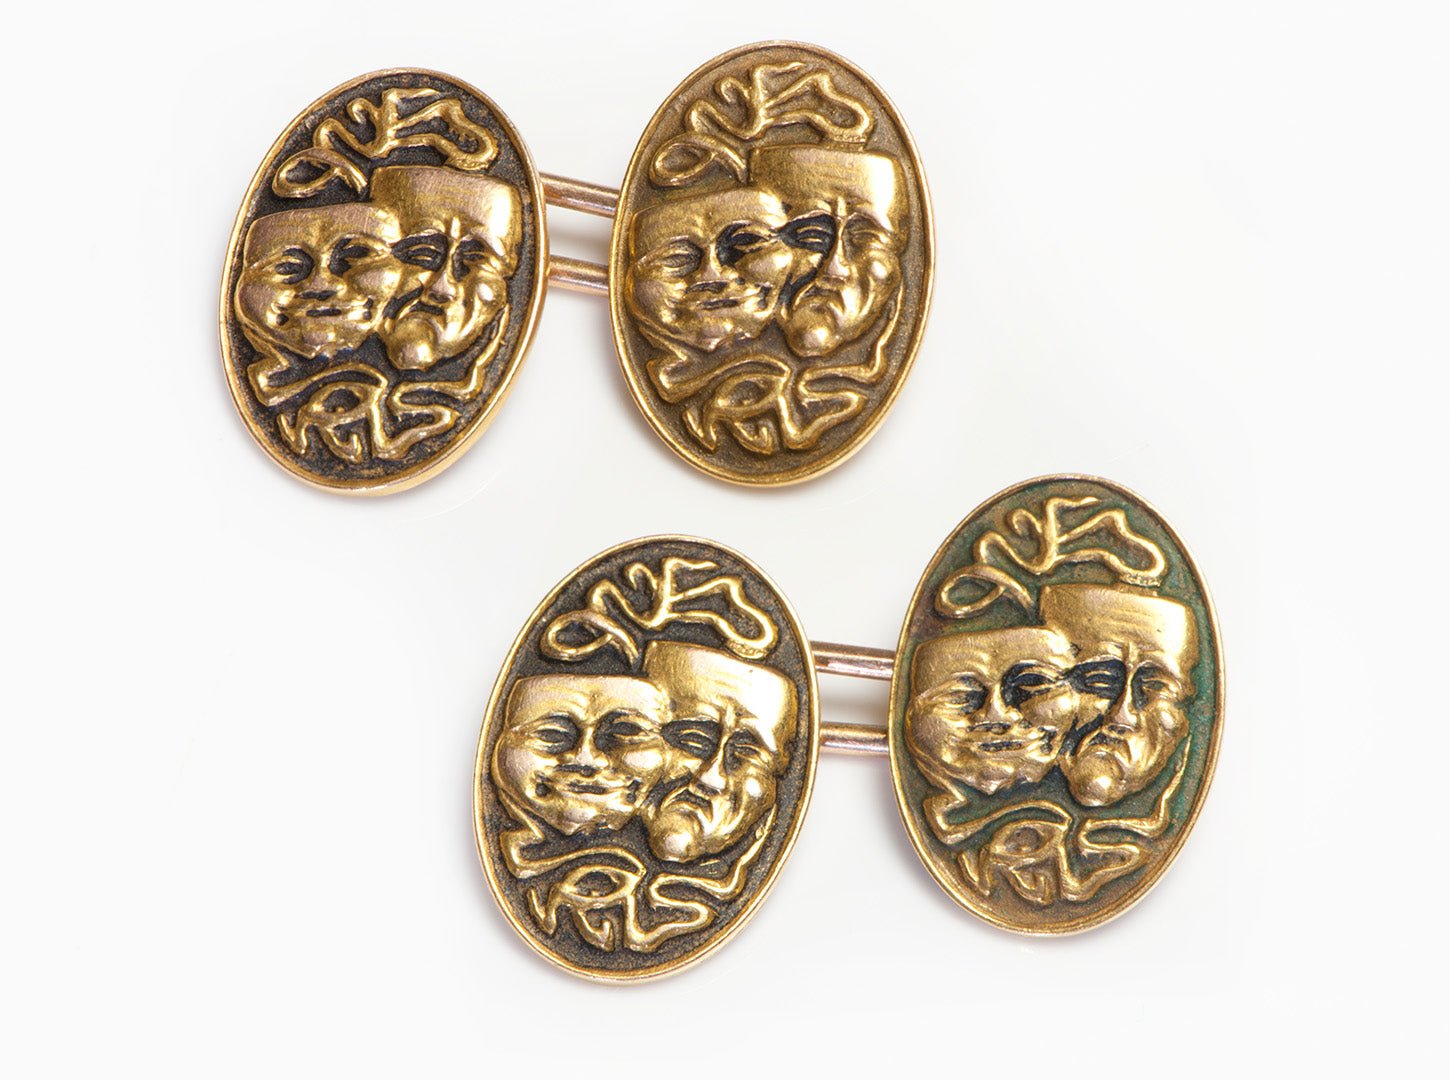 Antique Art Nouveau Comedy and Tragedy Gold Cufflinks - DSF Antique Jewelry